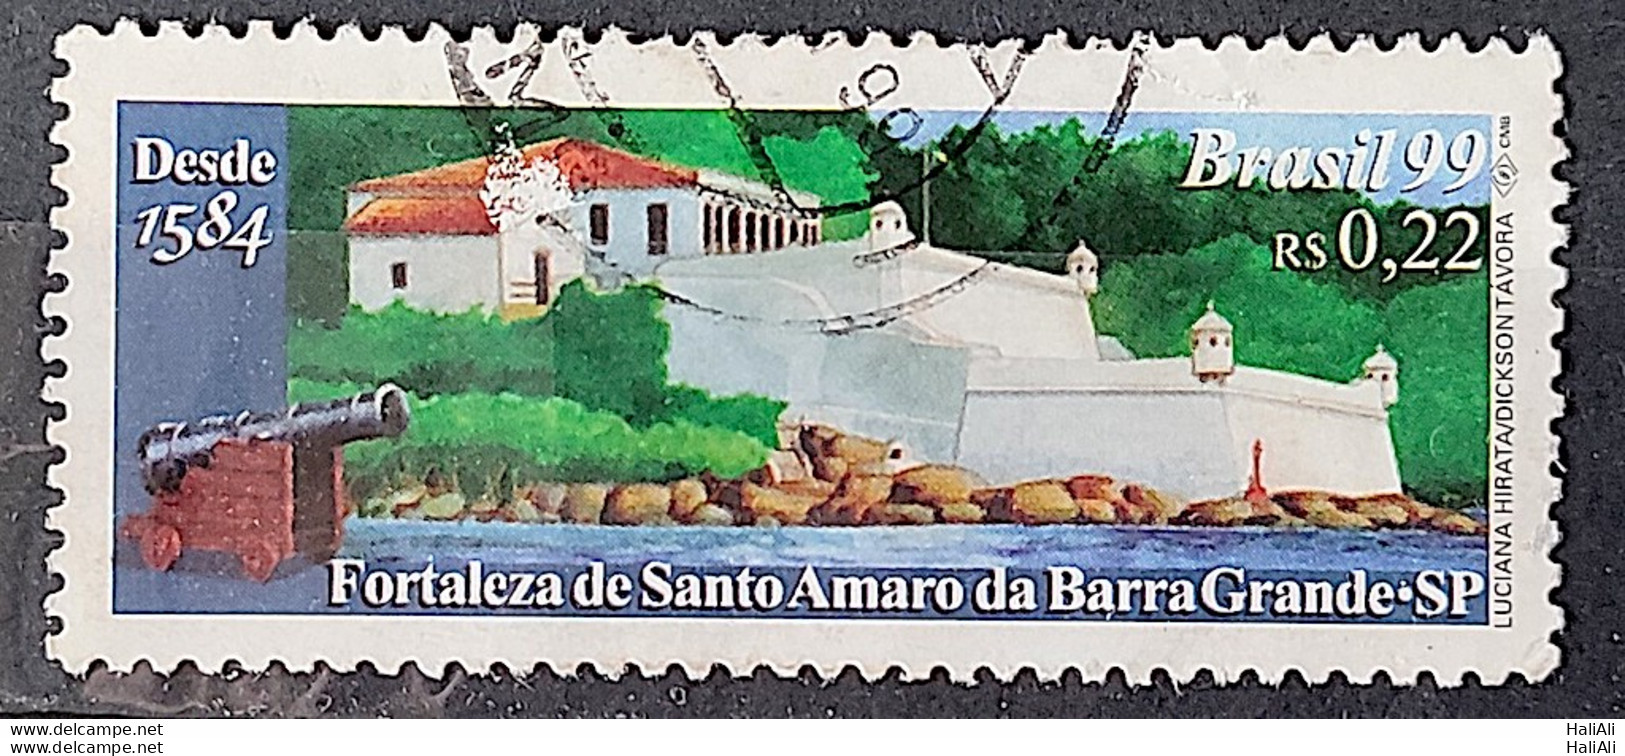 C 2194 Brazil Stamp Fortress Of Santo Amaro Of Barra Grande Military 1999 Circulated 2 - Used Stamps